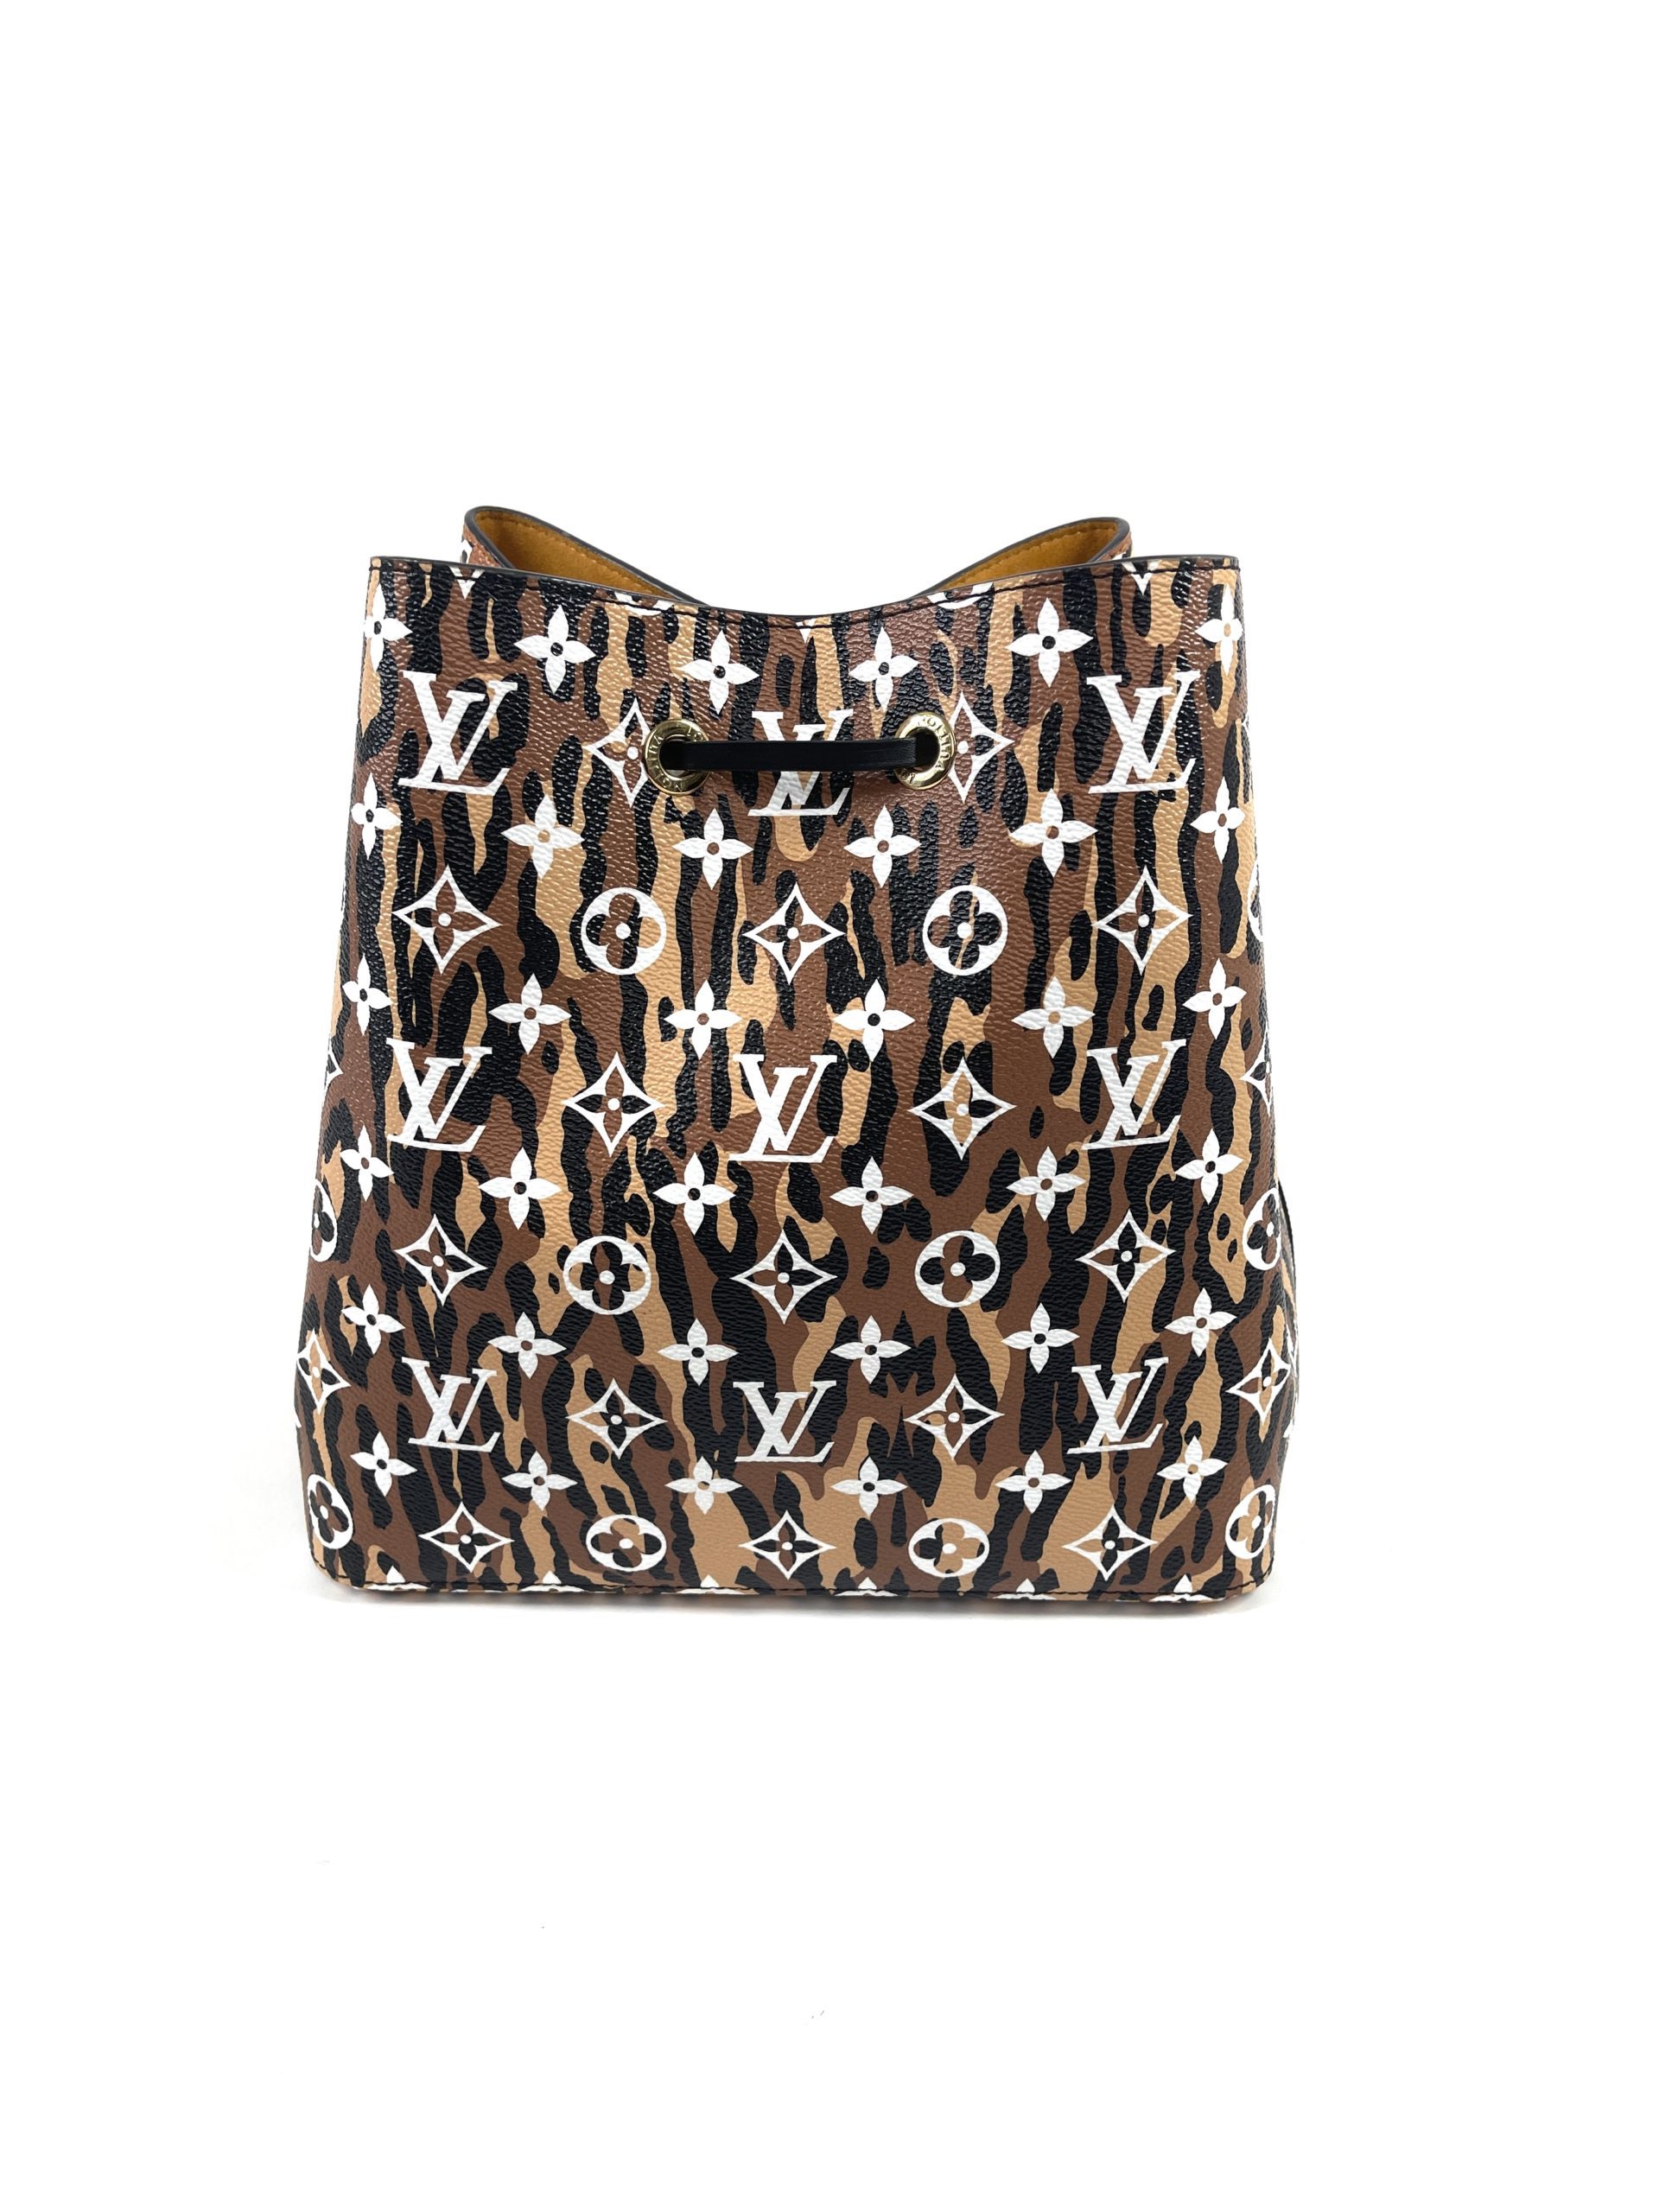 Louis Vuitton Caramel Jungle Neo Noe MM - A World Of Goods For You